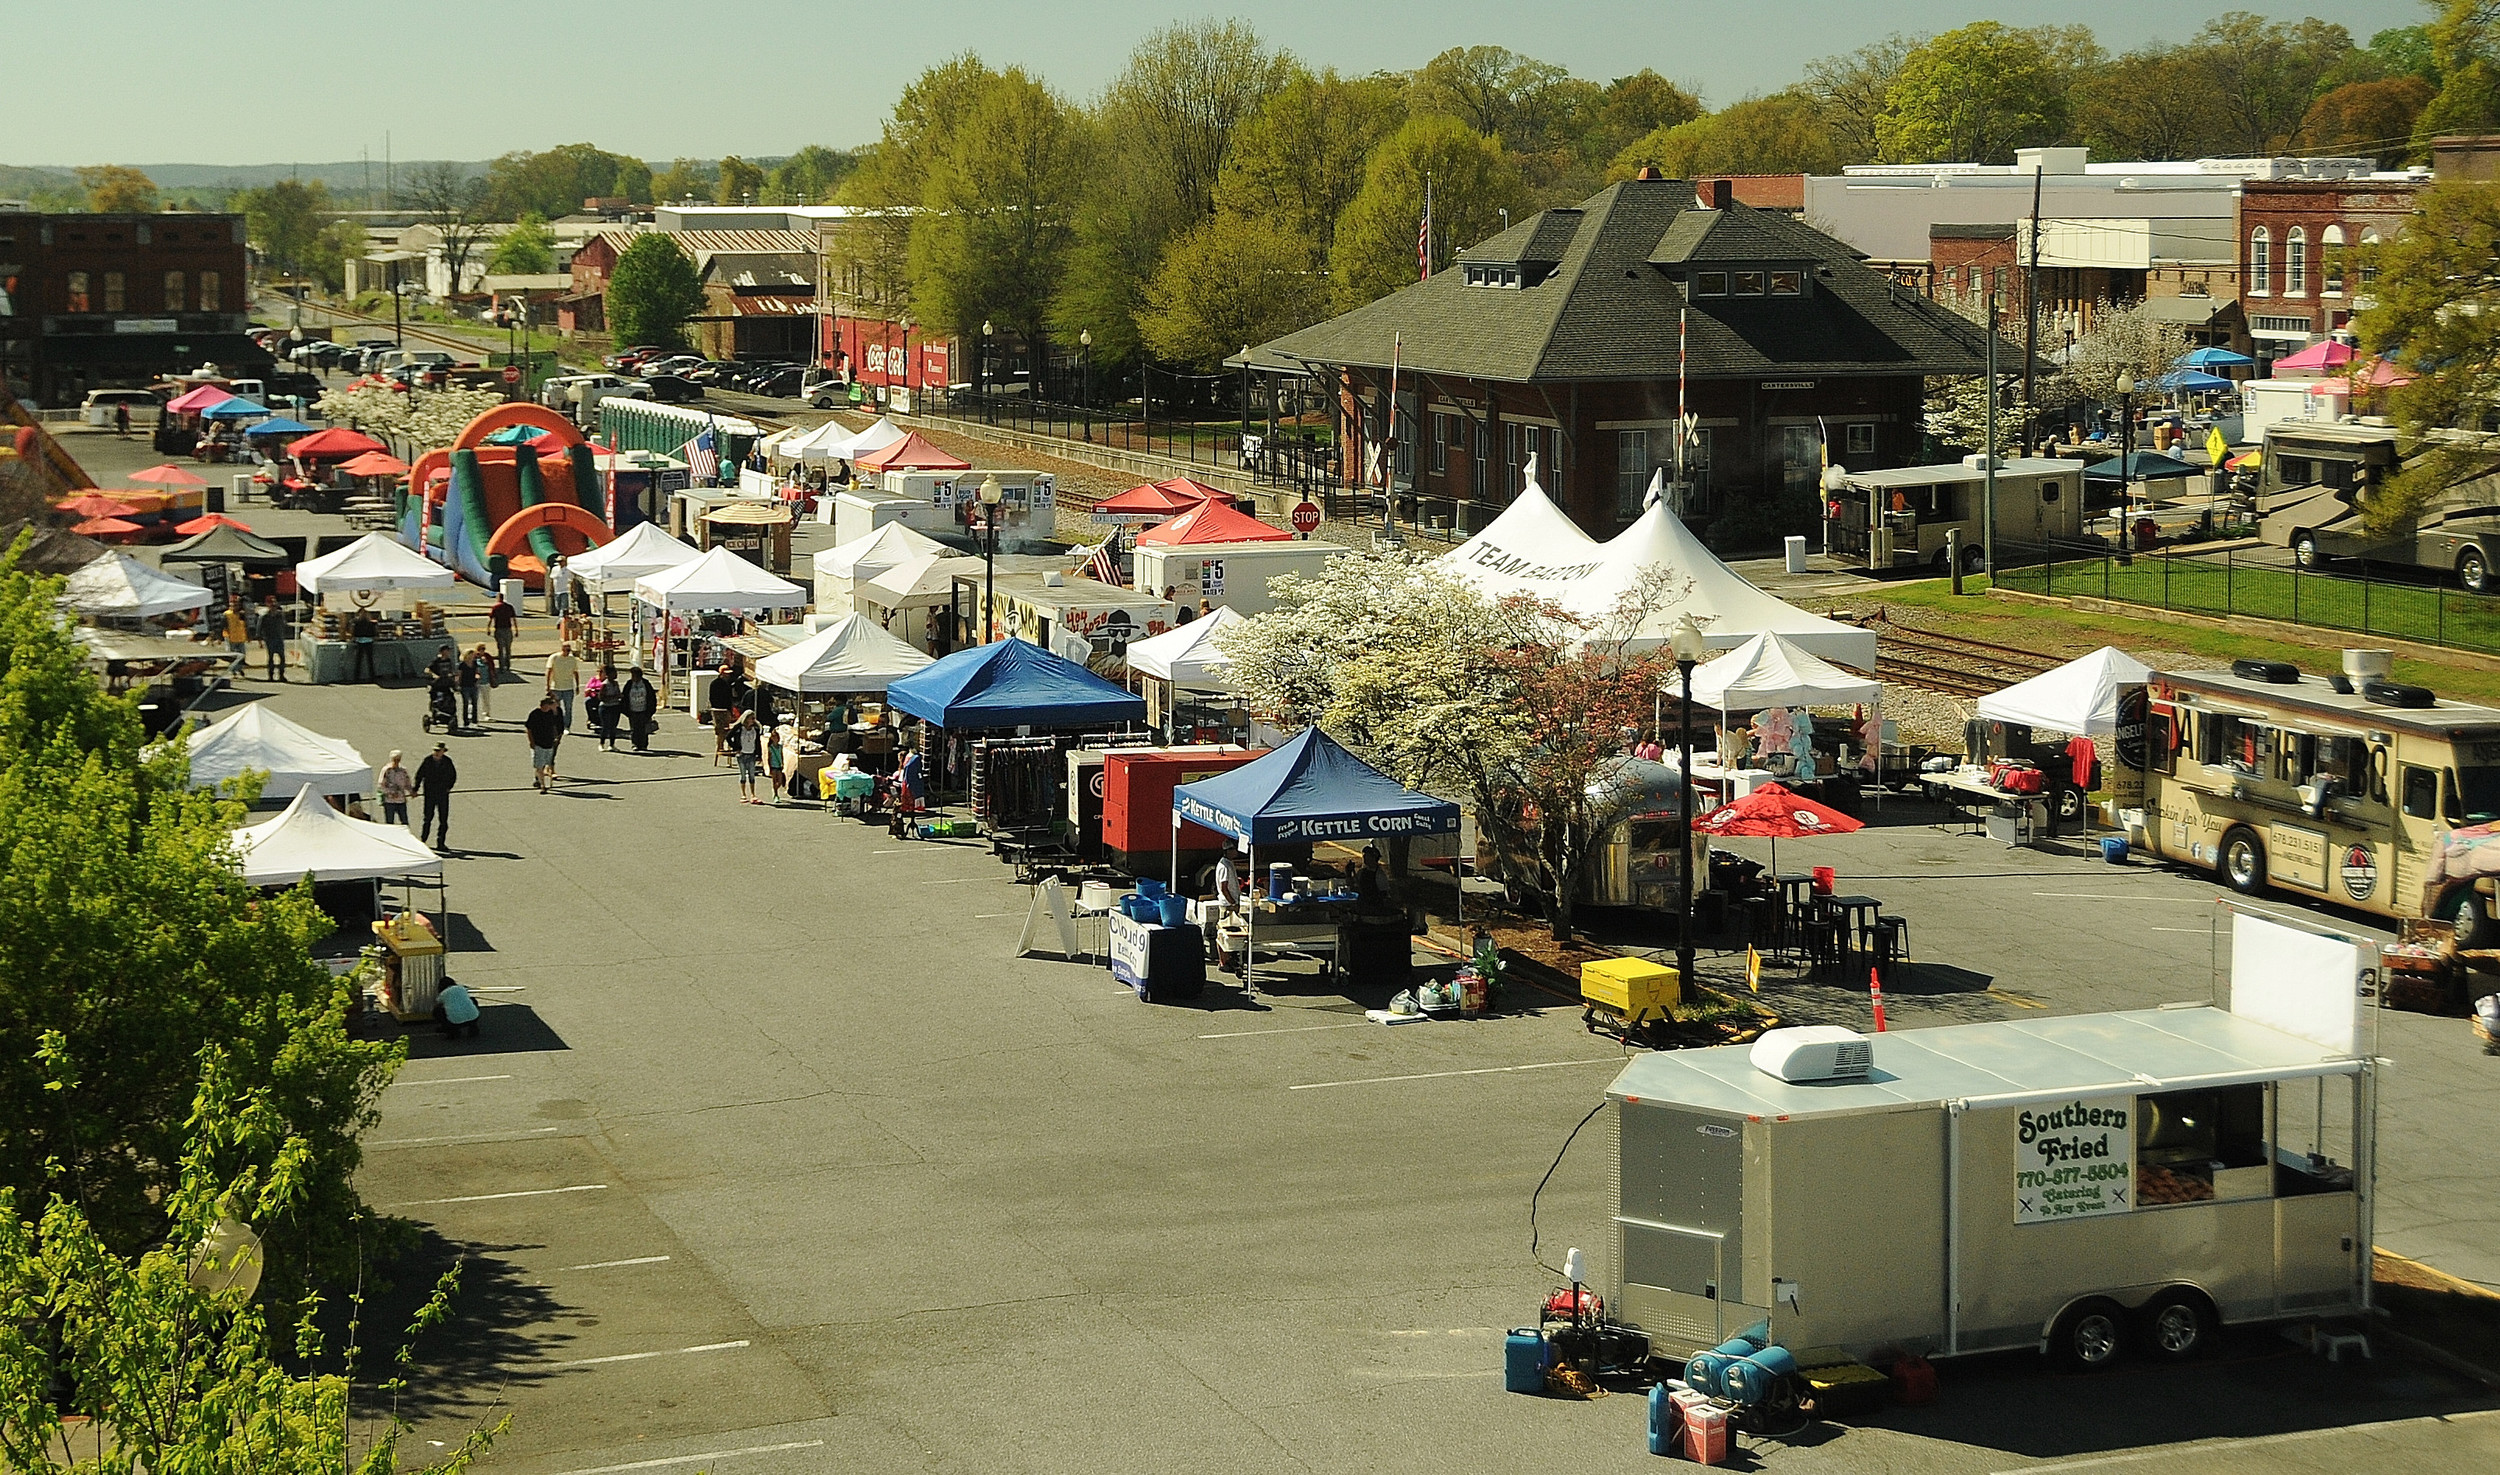 BBQ and Brews festival on tap for downtown Cartersville April 7 The